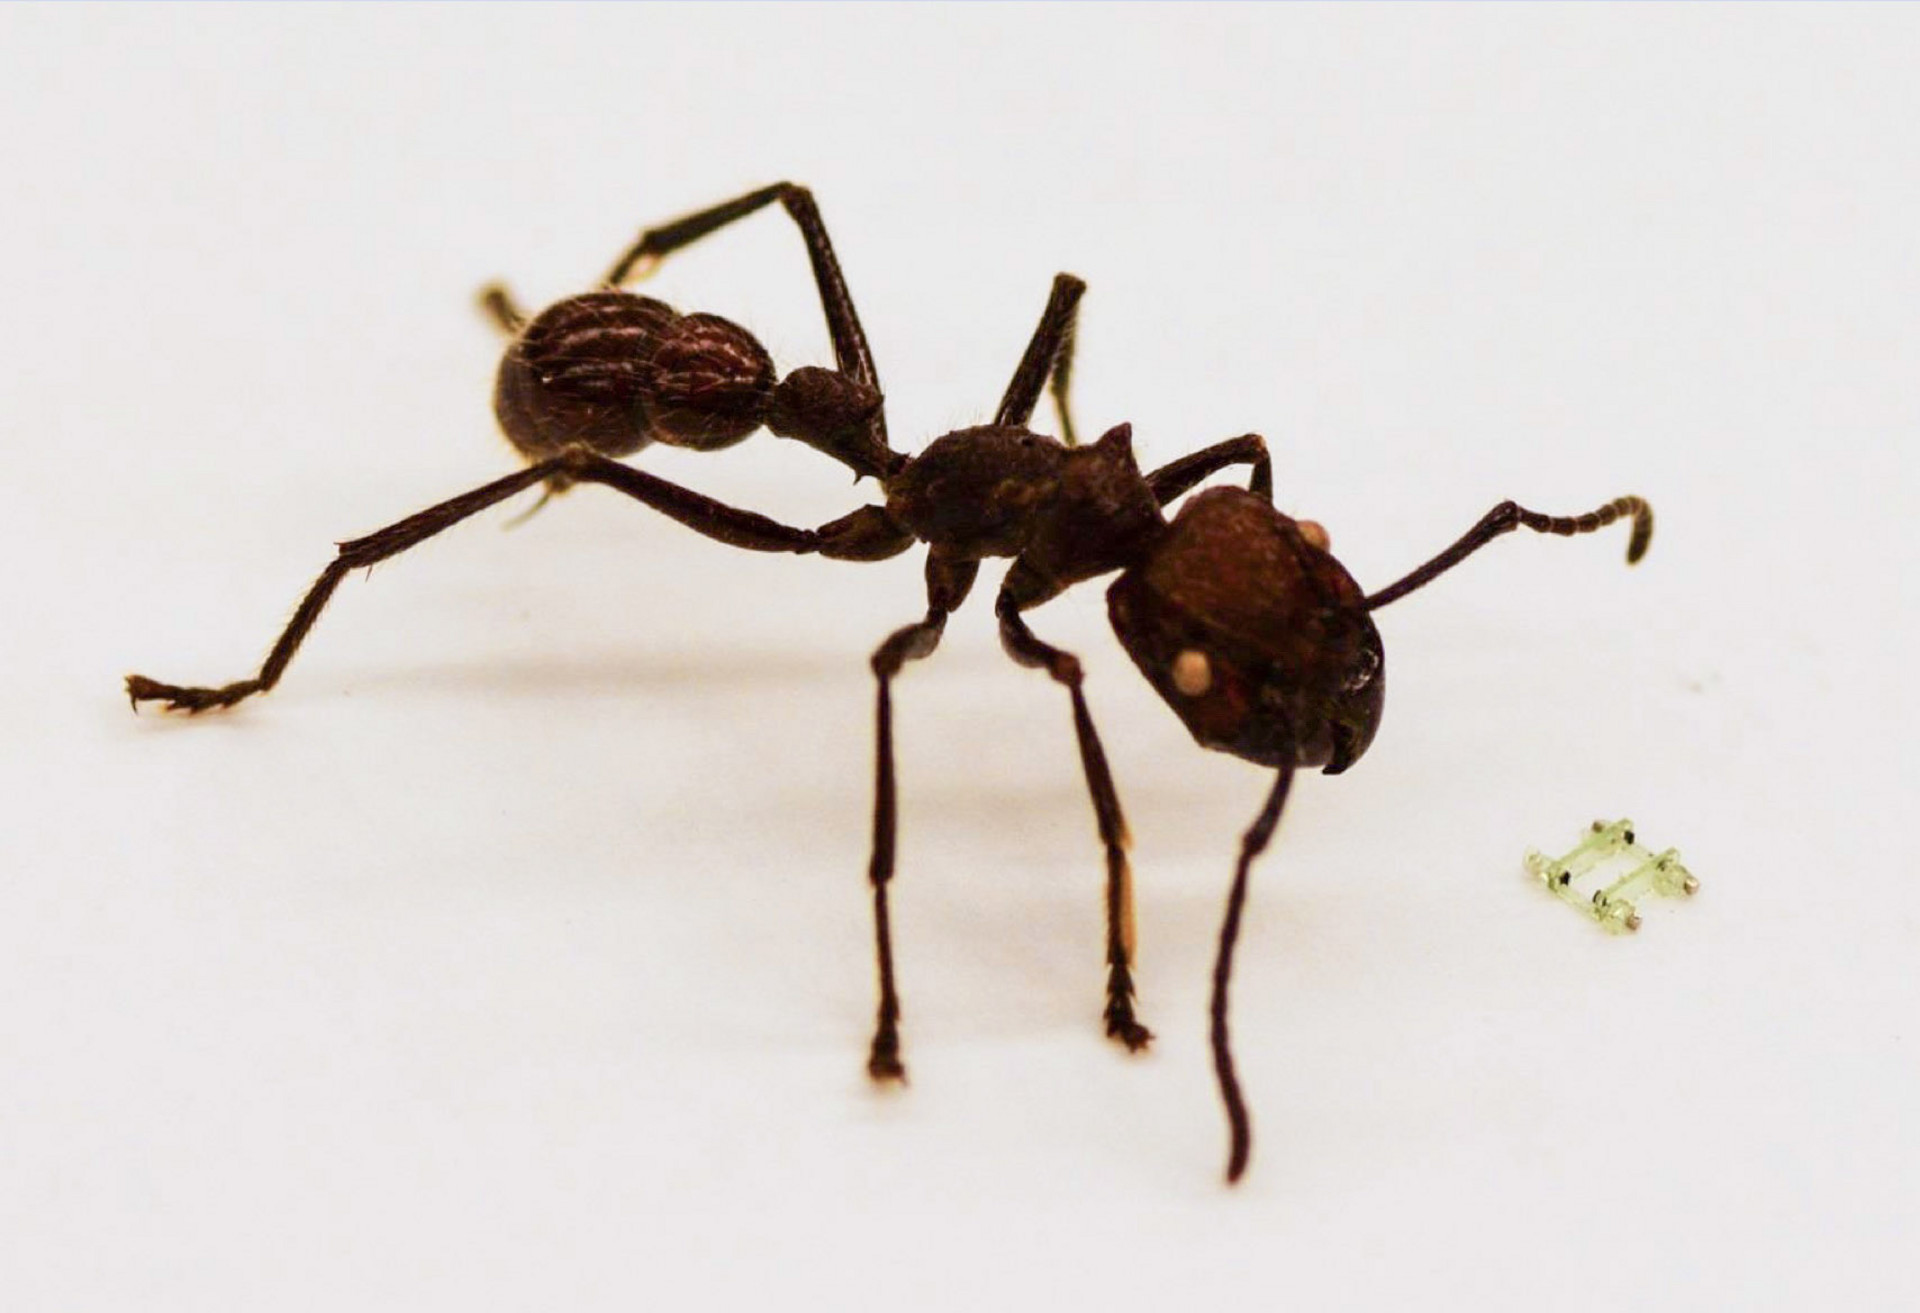 Extremely small 3D printed microrobot fabricated with Nanoscribe's 3D Microfabrication technology next to an ant